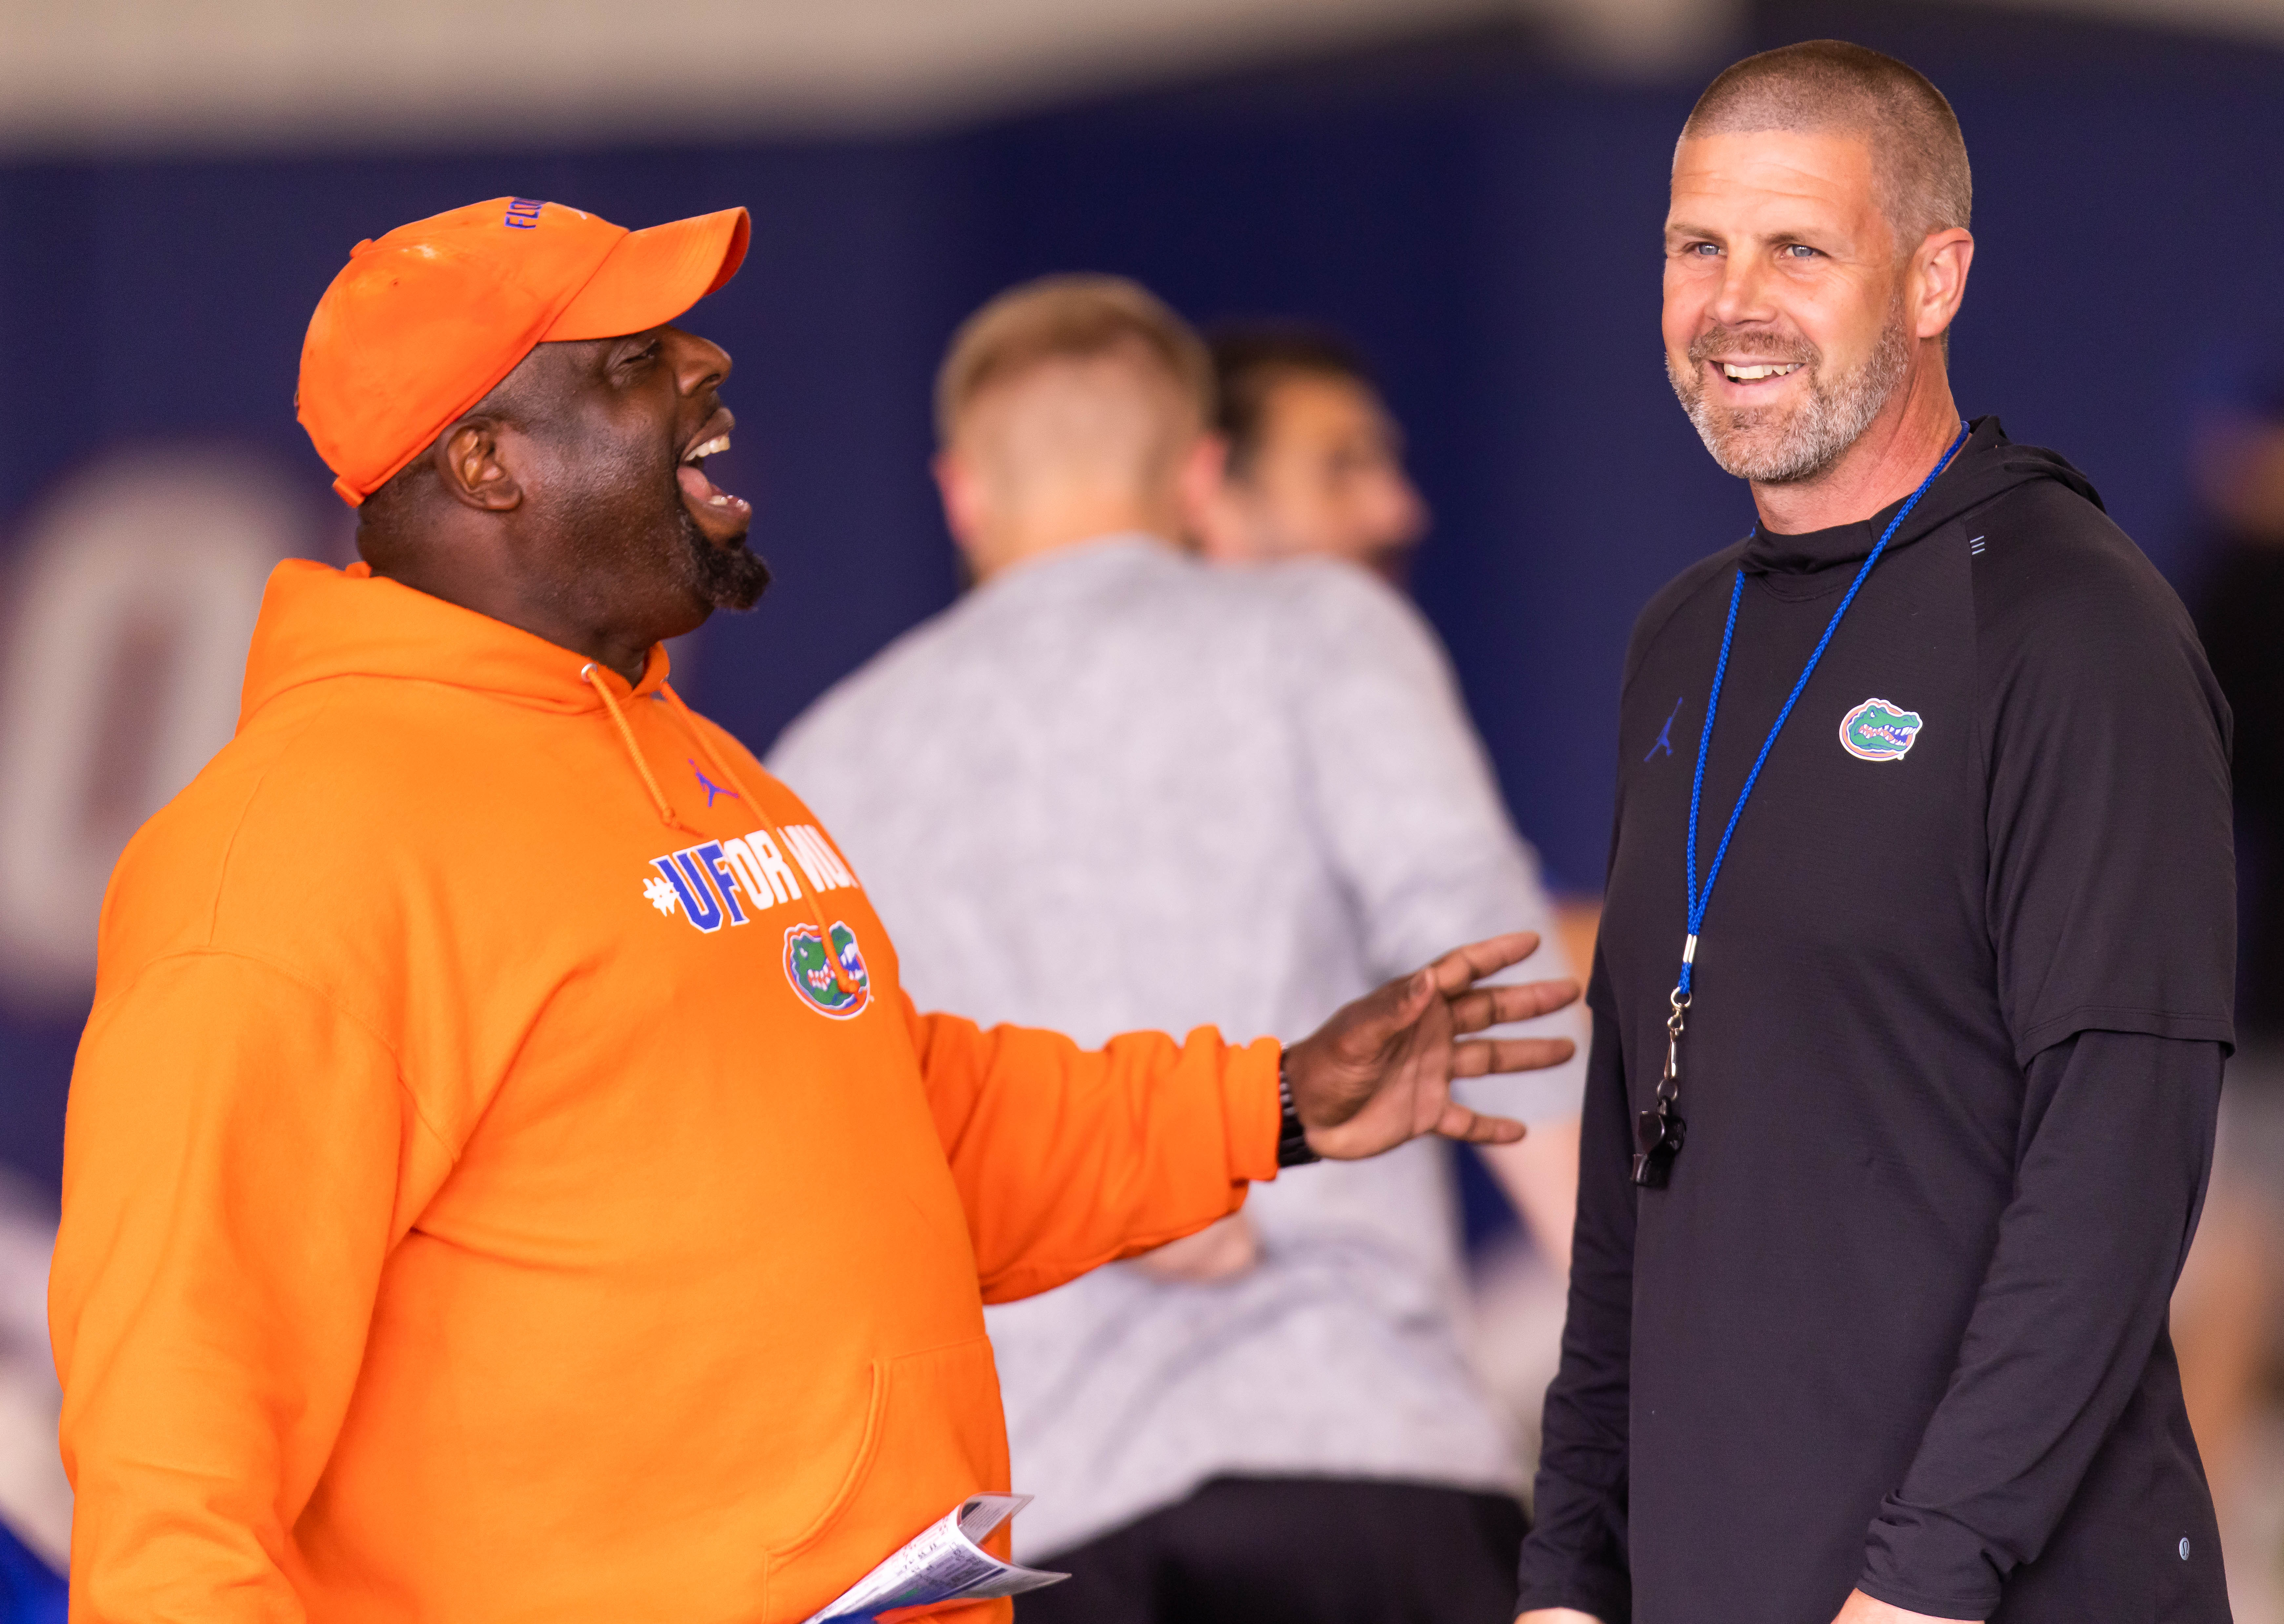 Florida Co-Defensive Coordinator Sean Spencer, left, talks with Florida Gators head coach Billy Napier during warmups. The University of Florida Gators held their 14th Spring football practice at Sanders Practice Fields in Gainesville, FL on Tuesday, April 11, 2023.